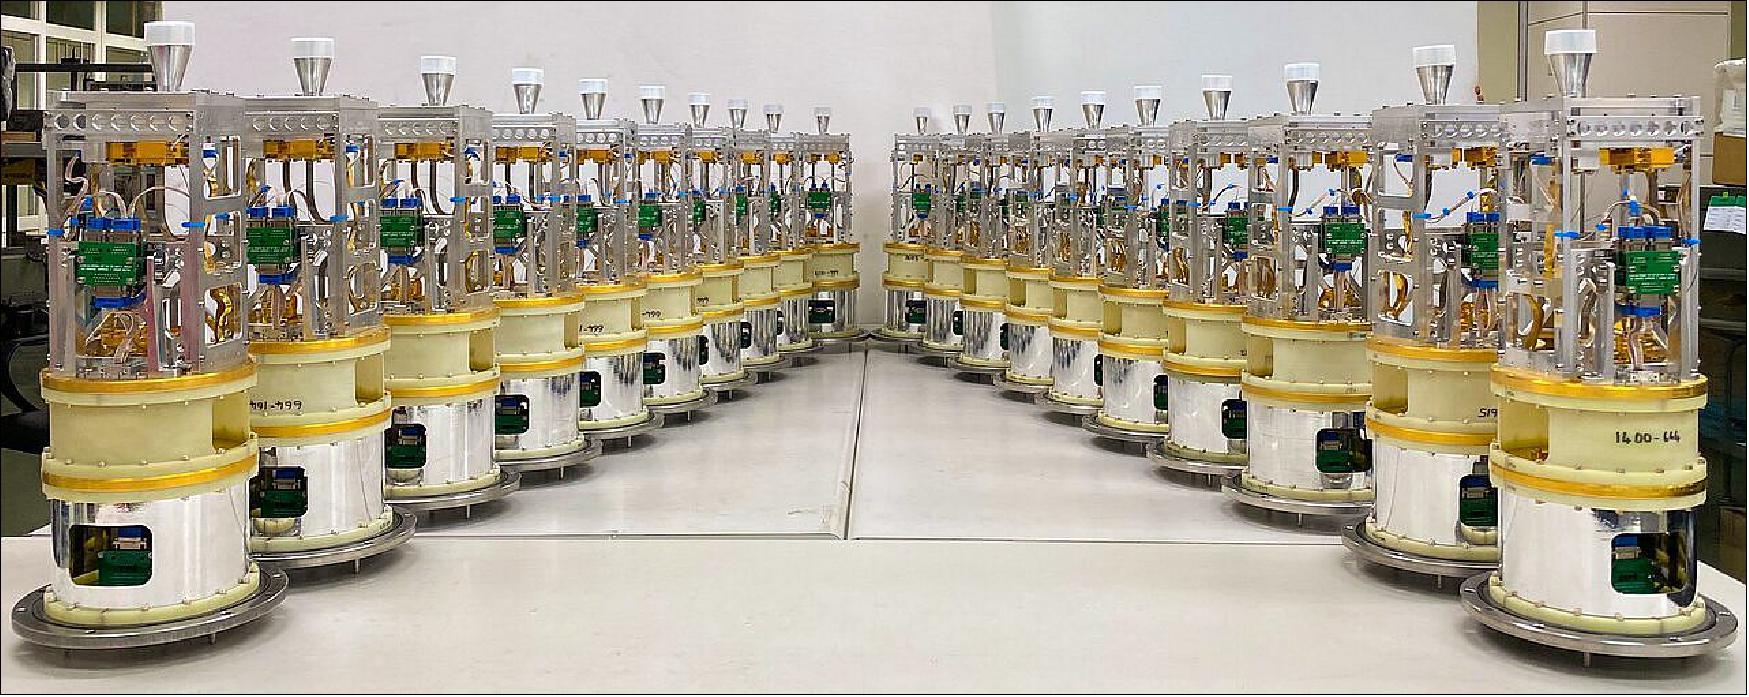 Figure 31: In this image, twenty of the cold cartridges of the band 1 receivers are lined up at the Front-end Testing Lab in Taichung, Taiwan, ready to be taken to Chile and installed on ALMA (Atacama Large Millimeter/submillimeter Array). The band 1 receivers pick up radio waves between 6 and 8.5 mm in length, the longest wavelength that ALMA is able to measure (image credit: ASIAA)